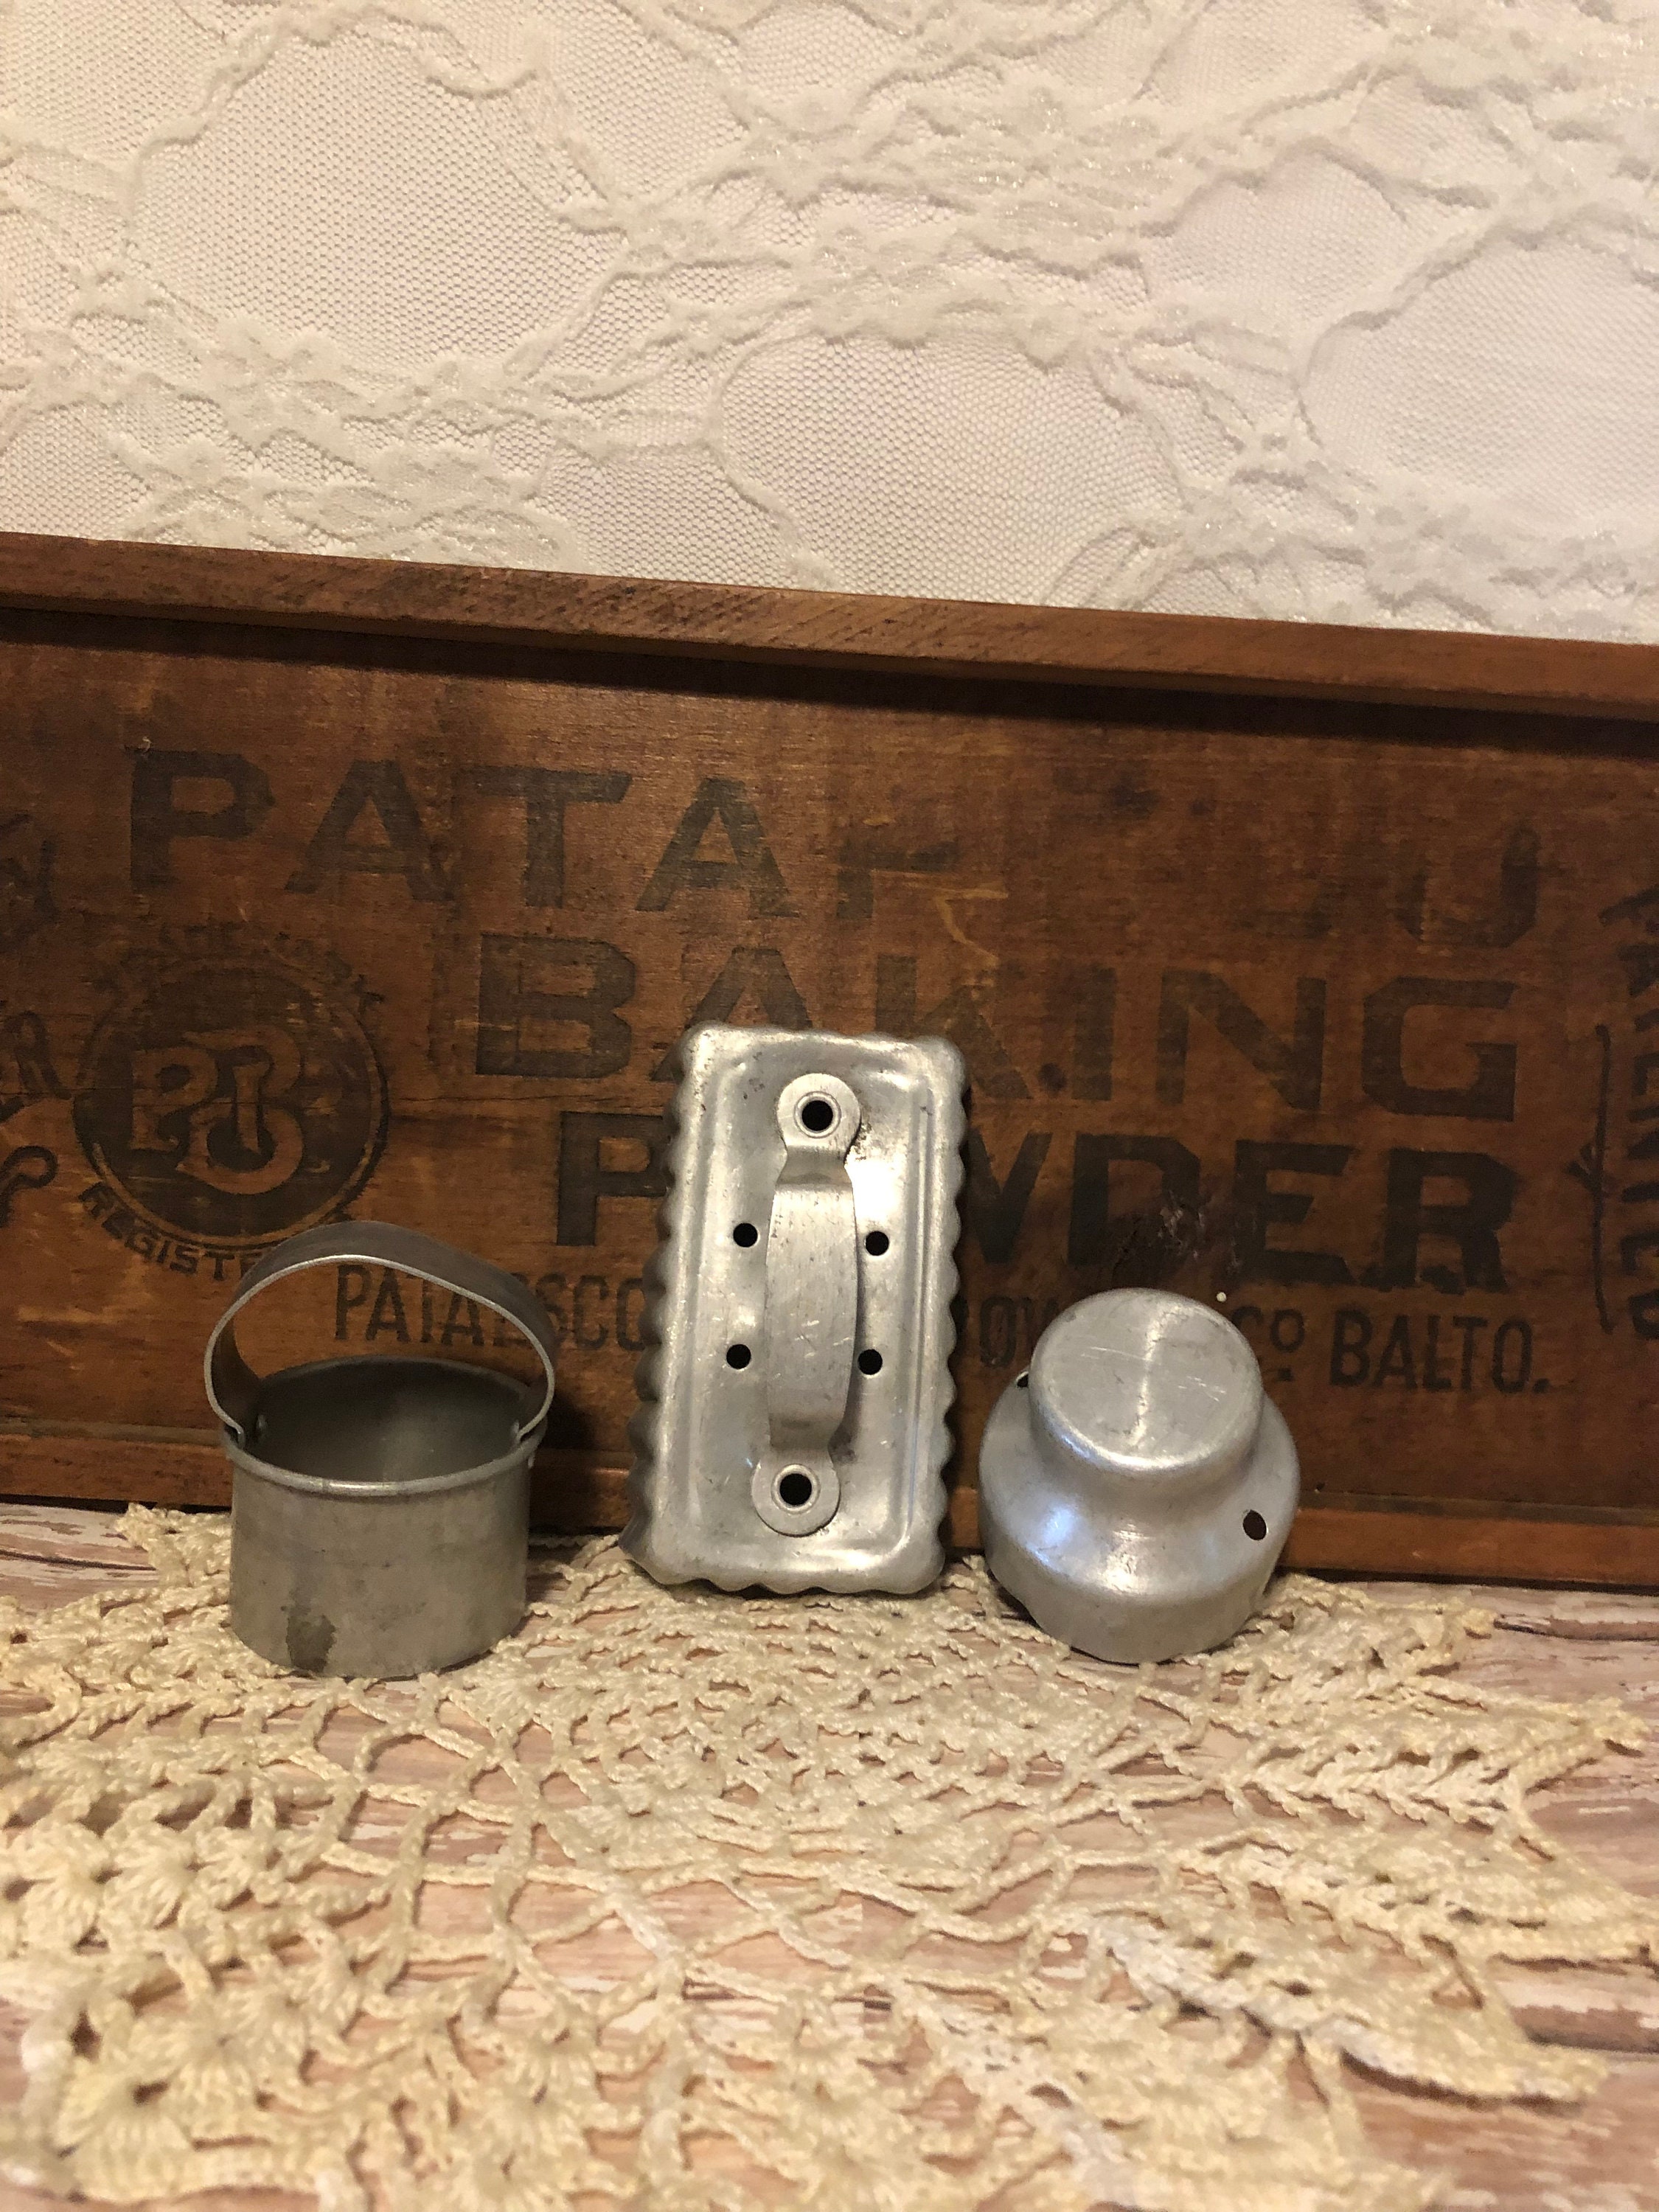 Vtg Aluminum Pan, Measuring Cup, Cutter, 3 Small Rustic Retro Kitchenware  Pieces: Happy Home Pan, Life Time Cup, Cutter W/ Crimped Edges 